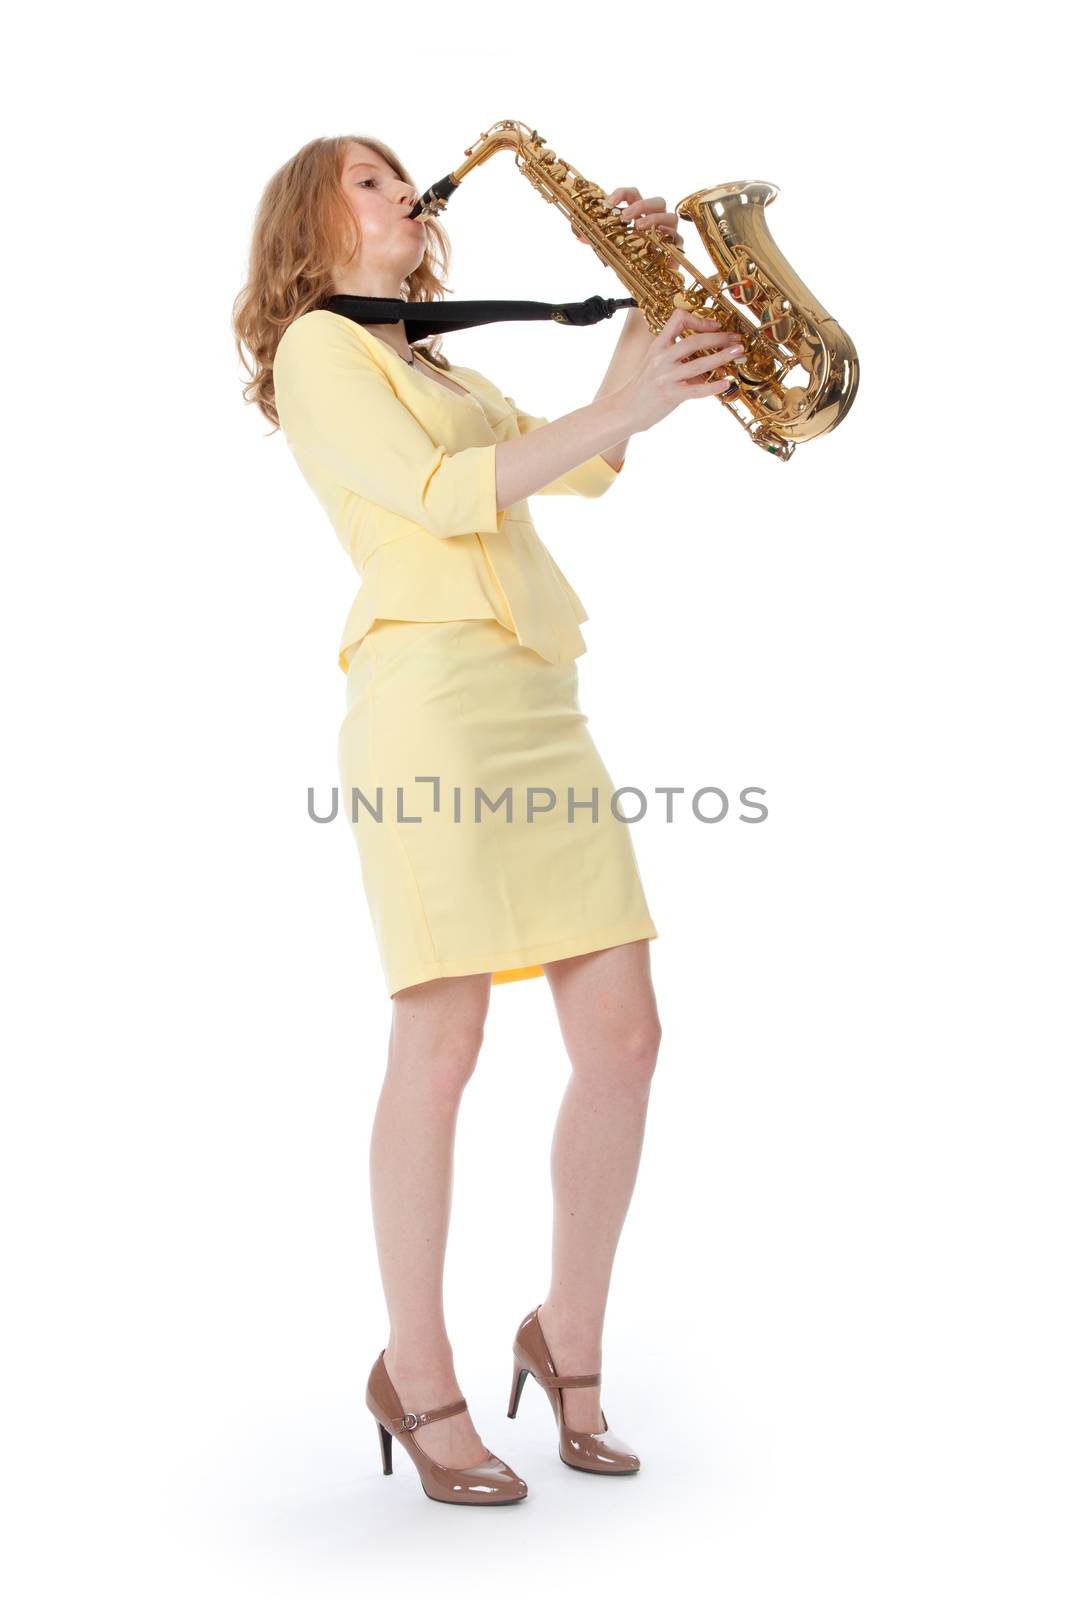 young woman in yellow mini dress playing the alto saxophone by ahavelaar